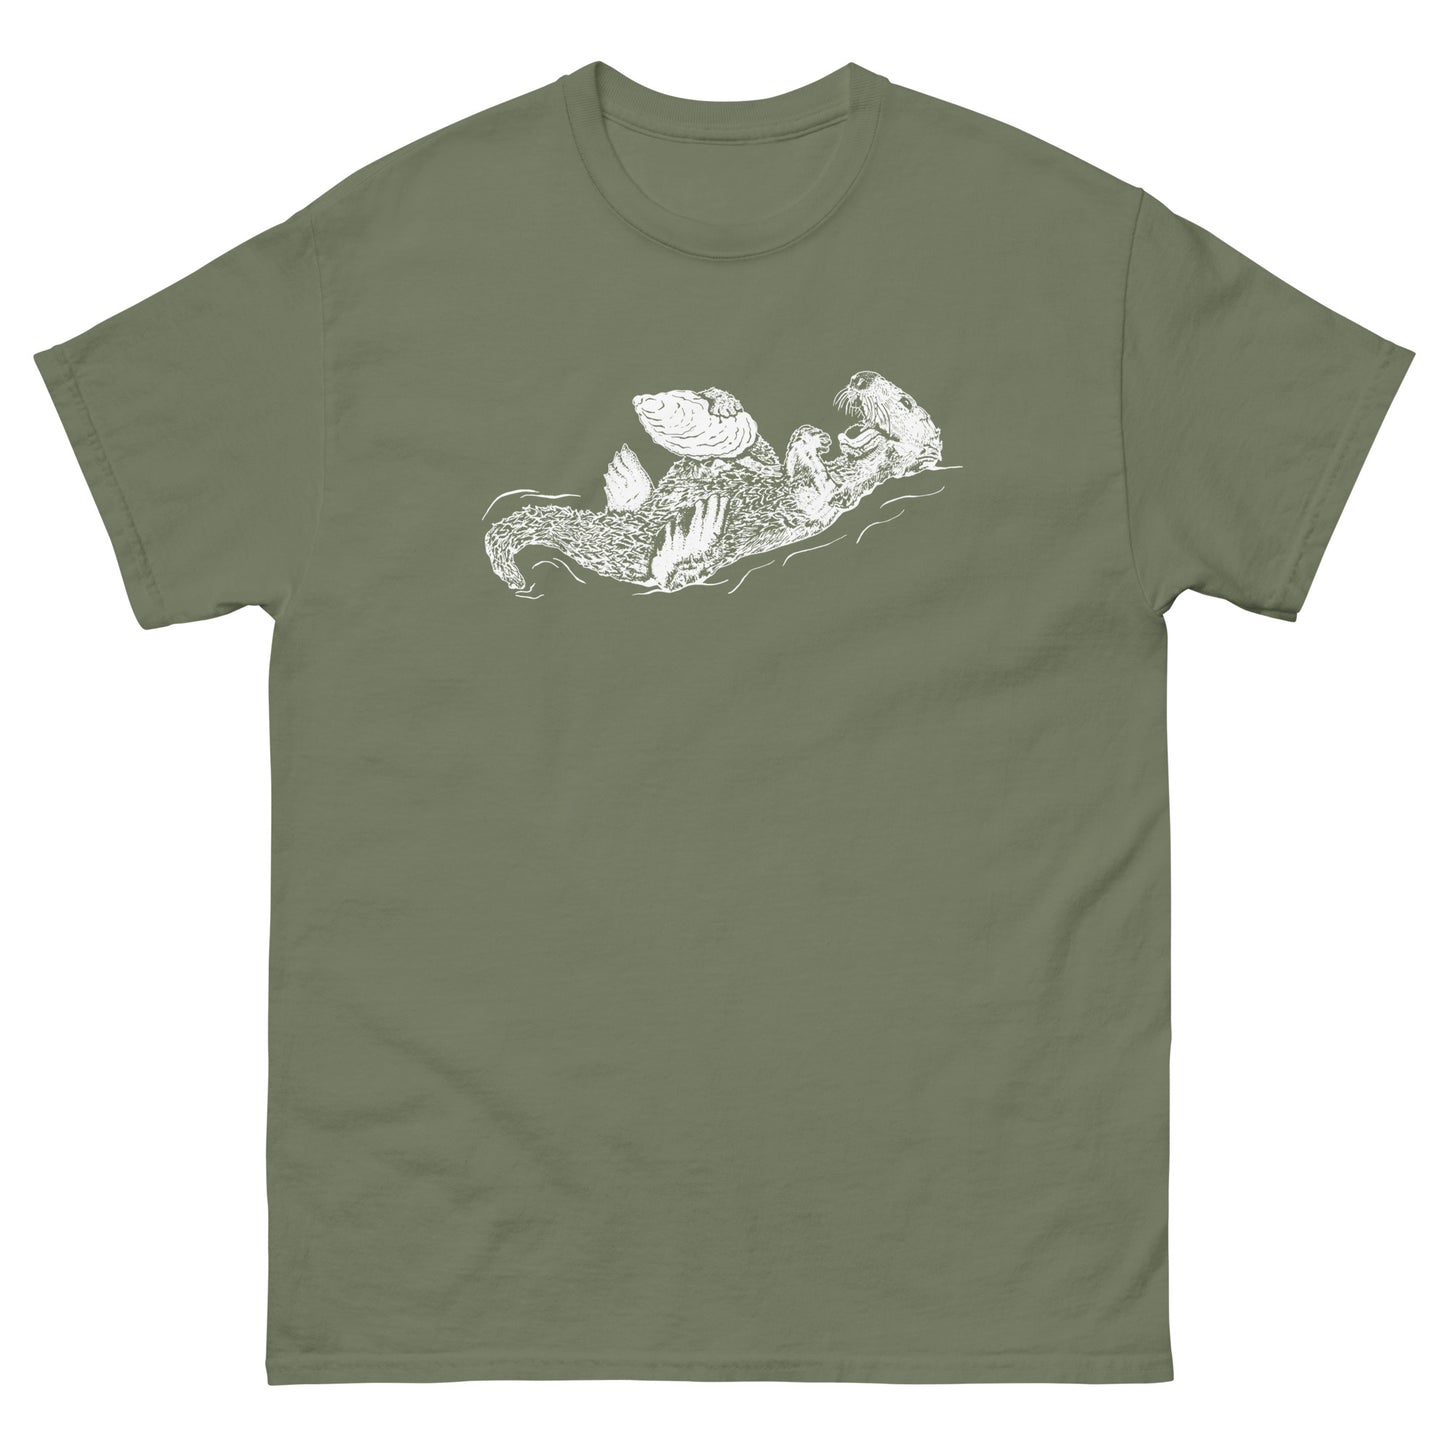 Sea Otter with Oyster - Men's classic tee Gildan 5000